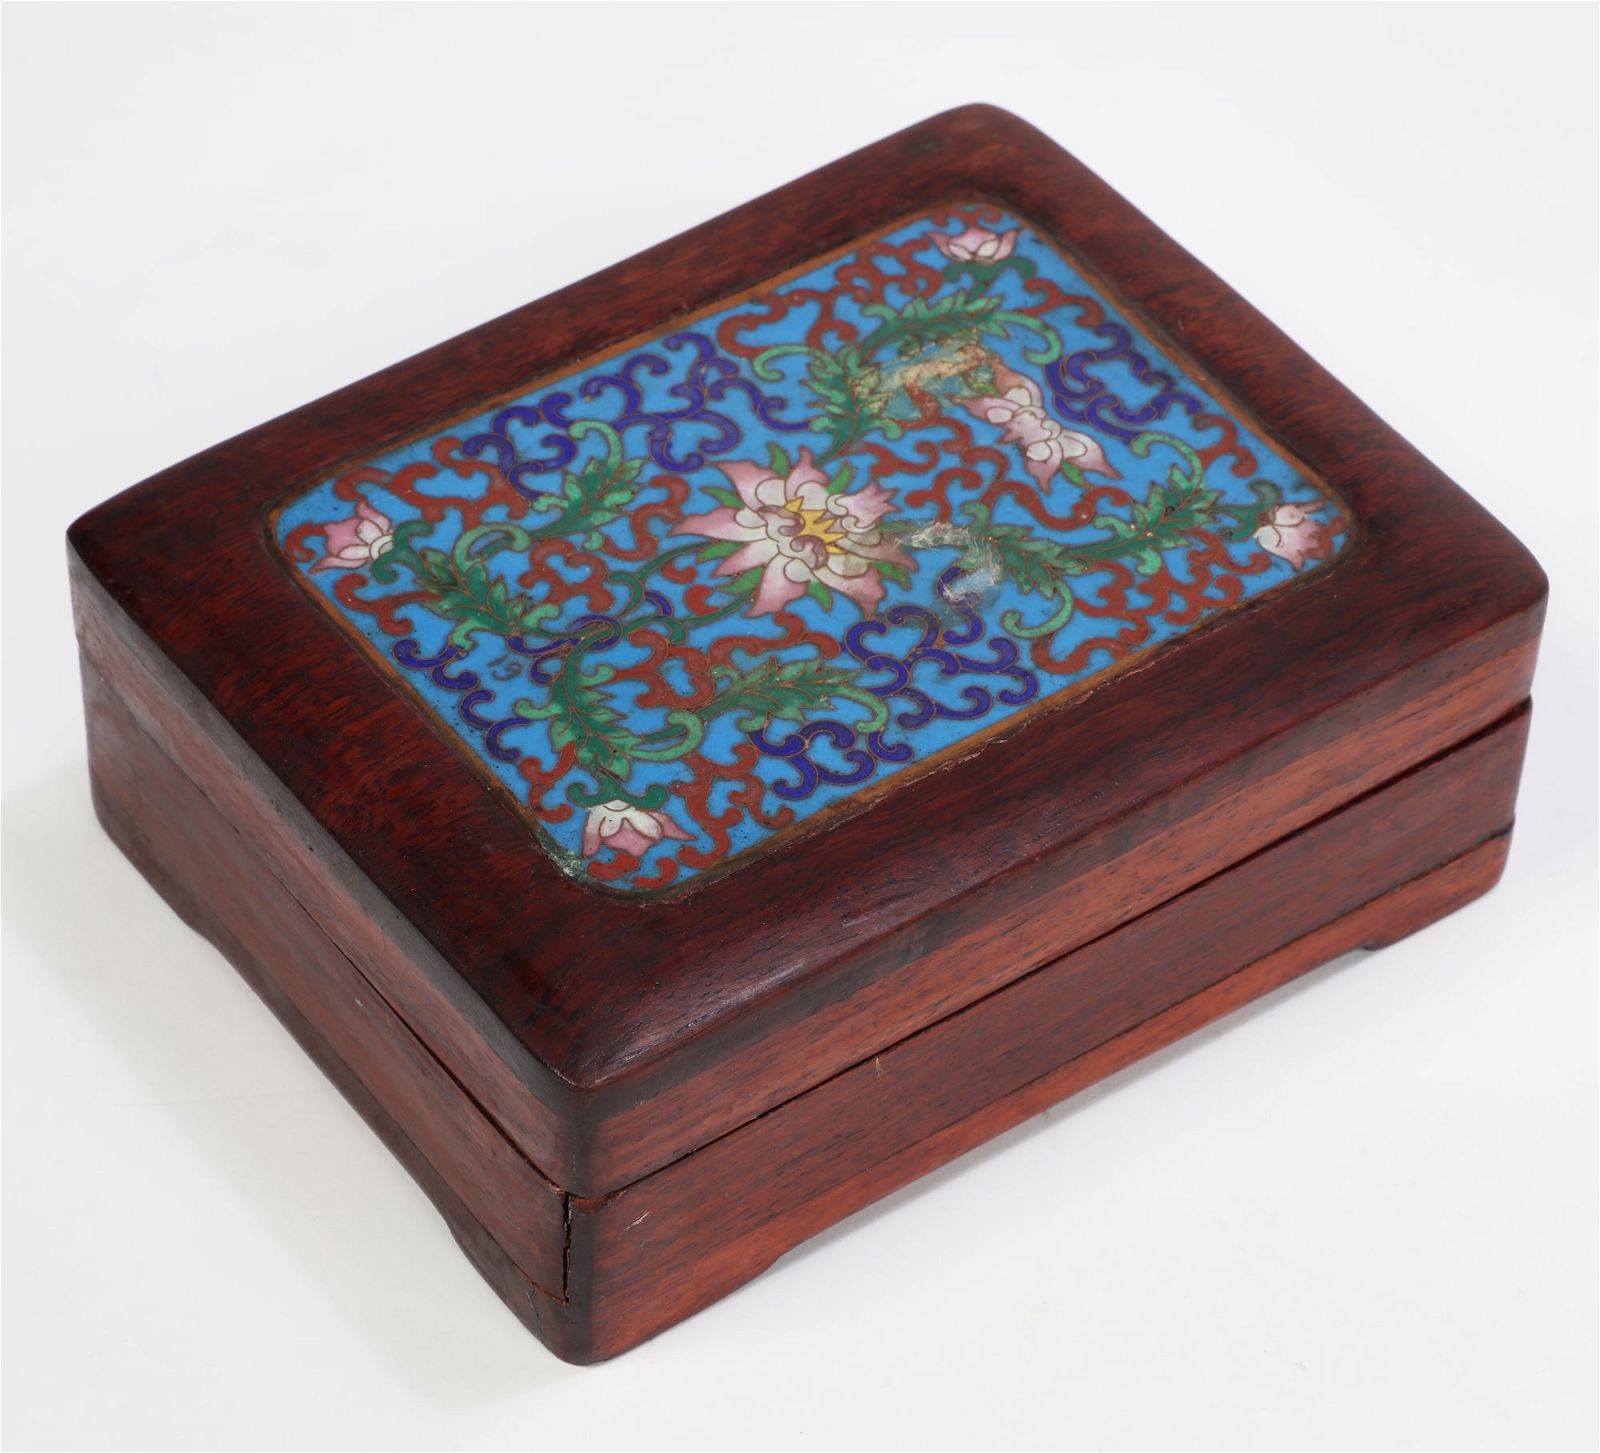 A CHINESE CLOISONNE ENAMEL INSET